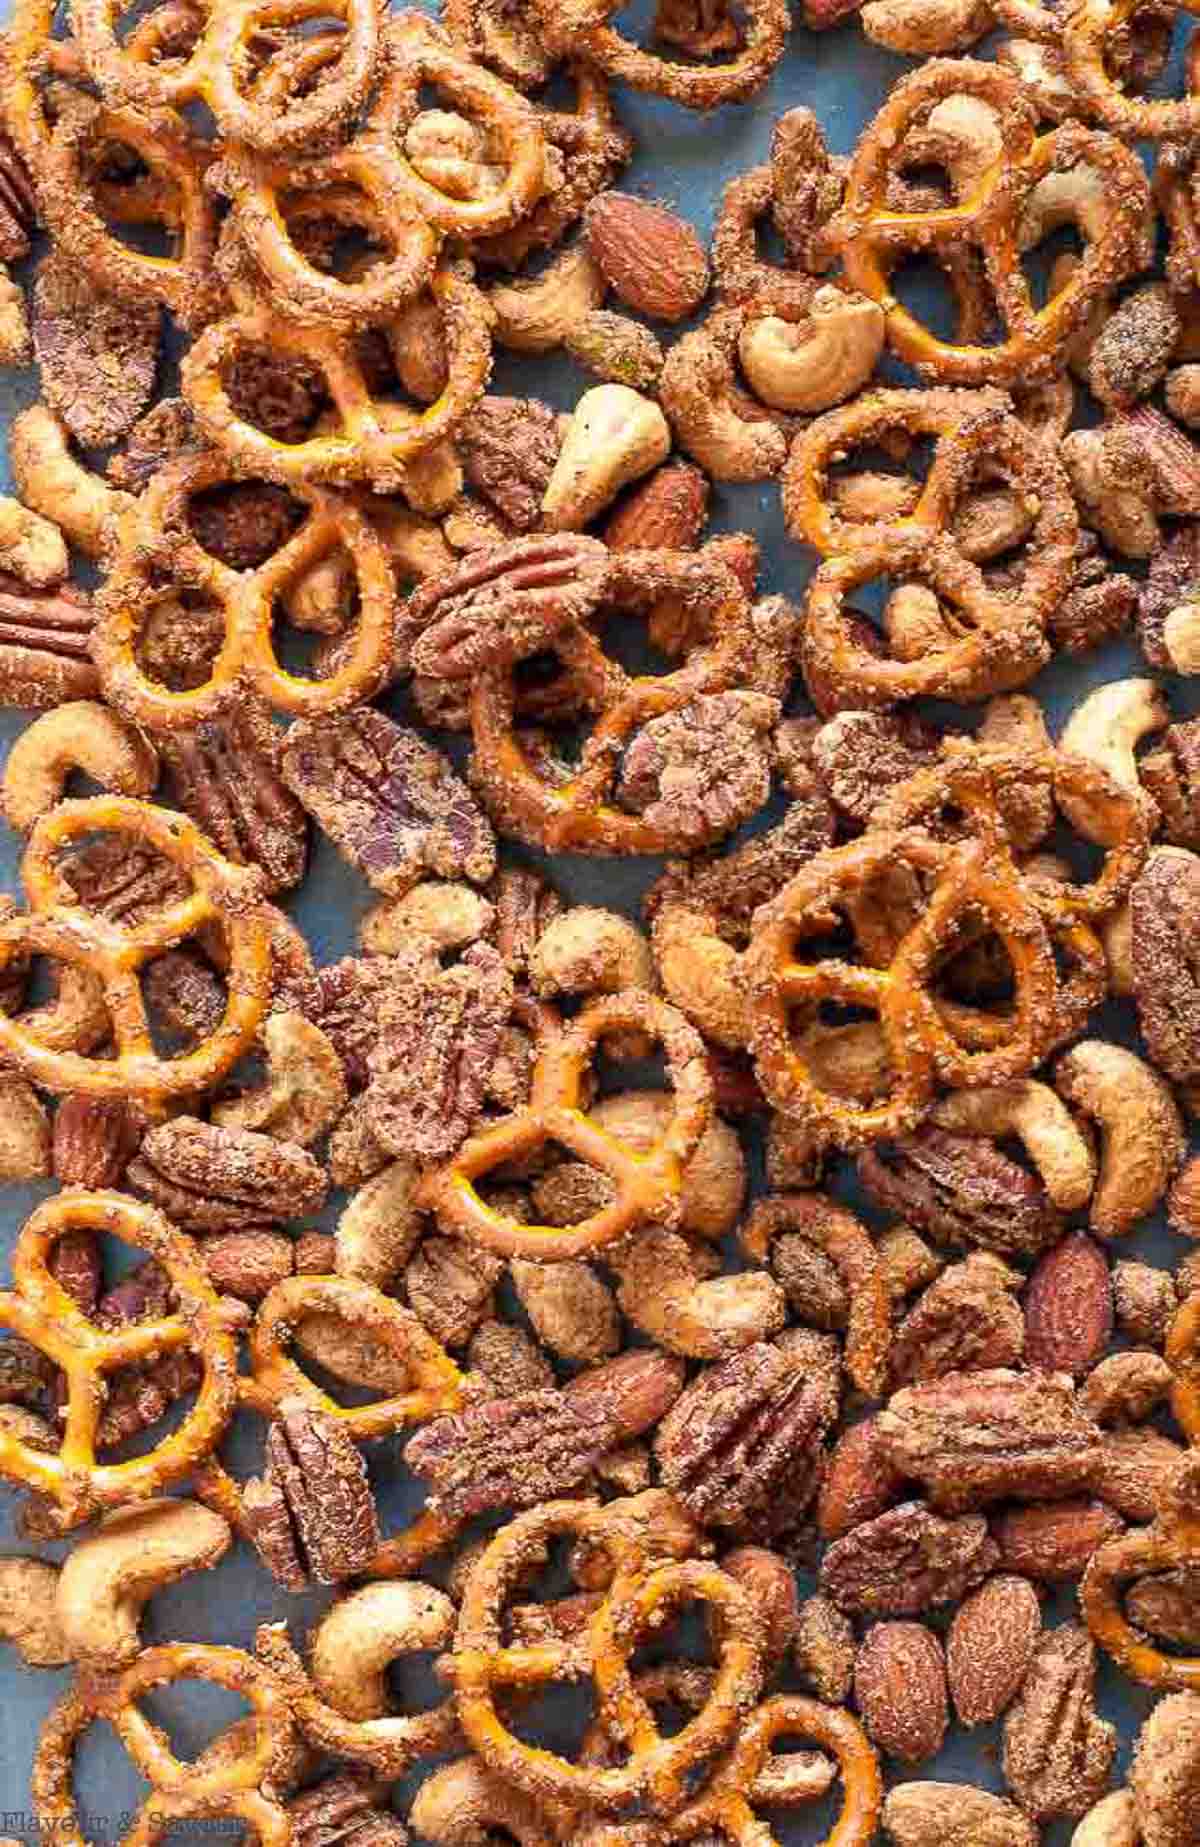 A spicy snack mix made with pretzels and mixed nuts on a baking sheet.